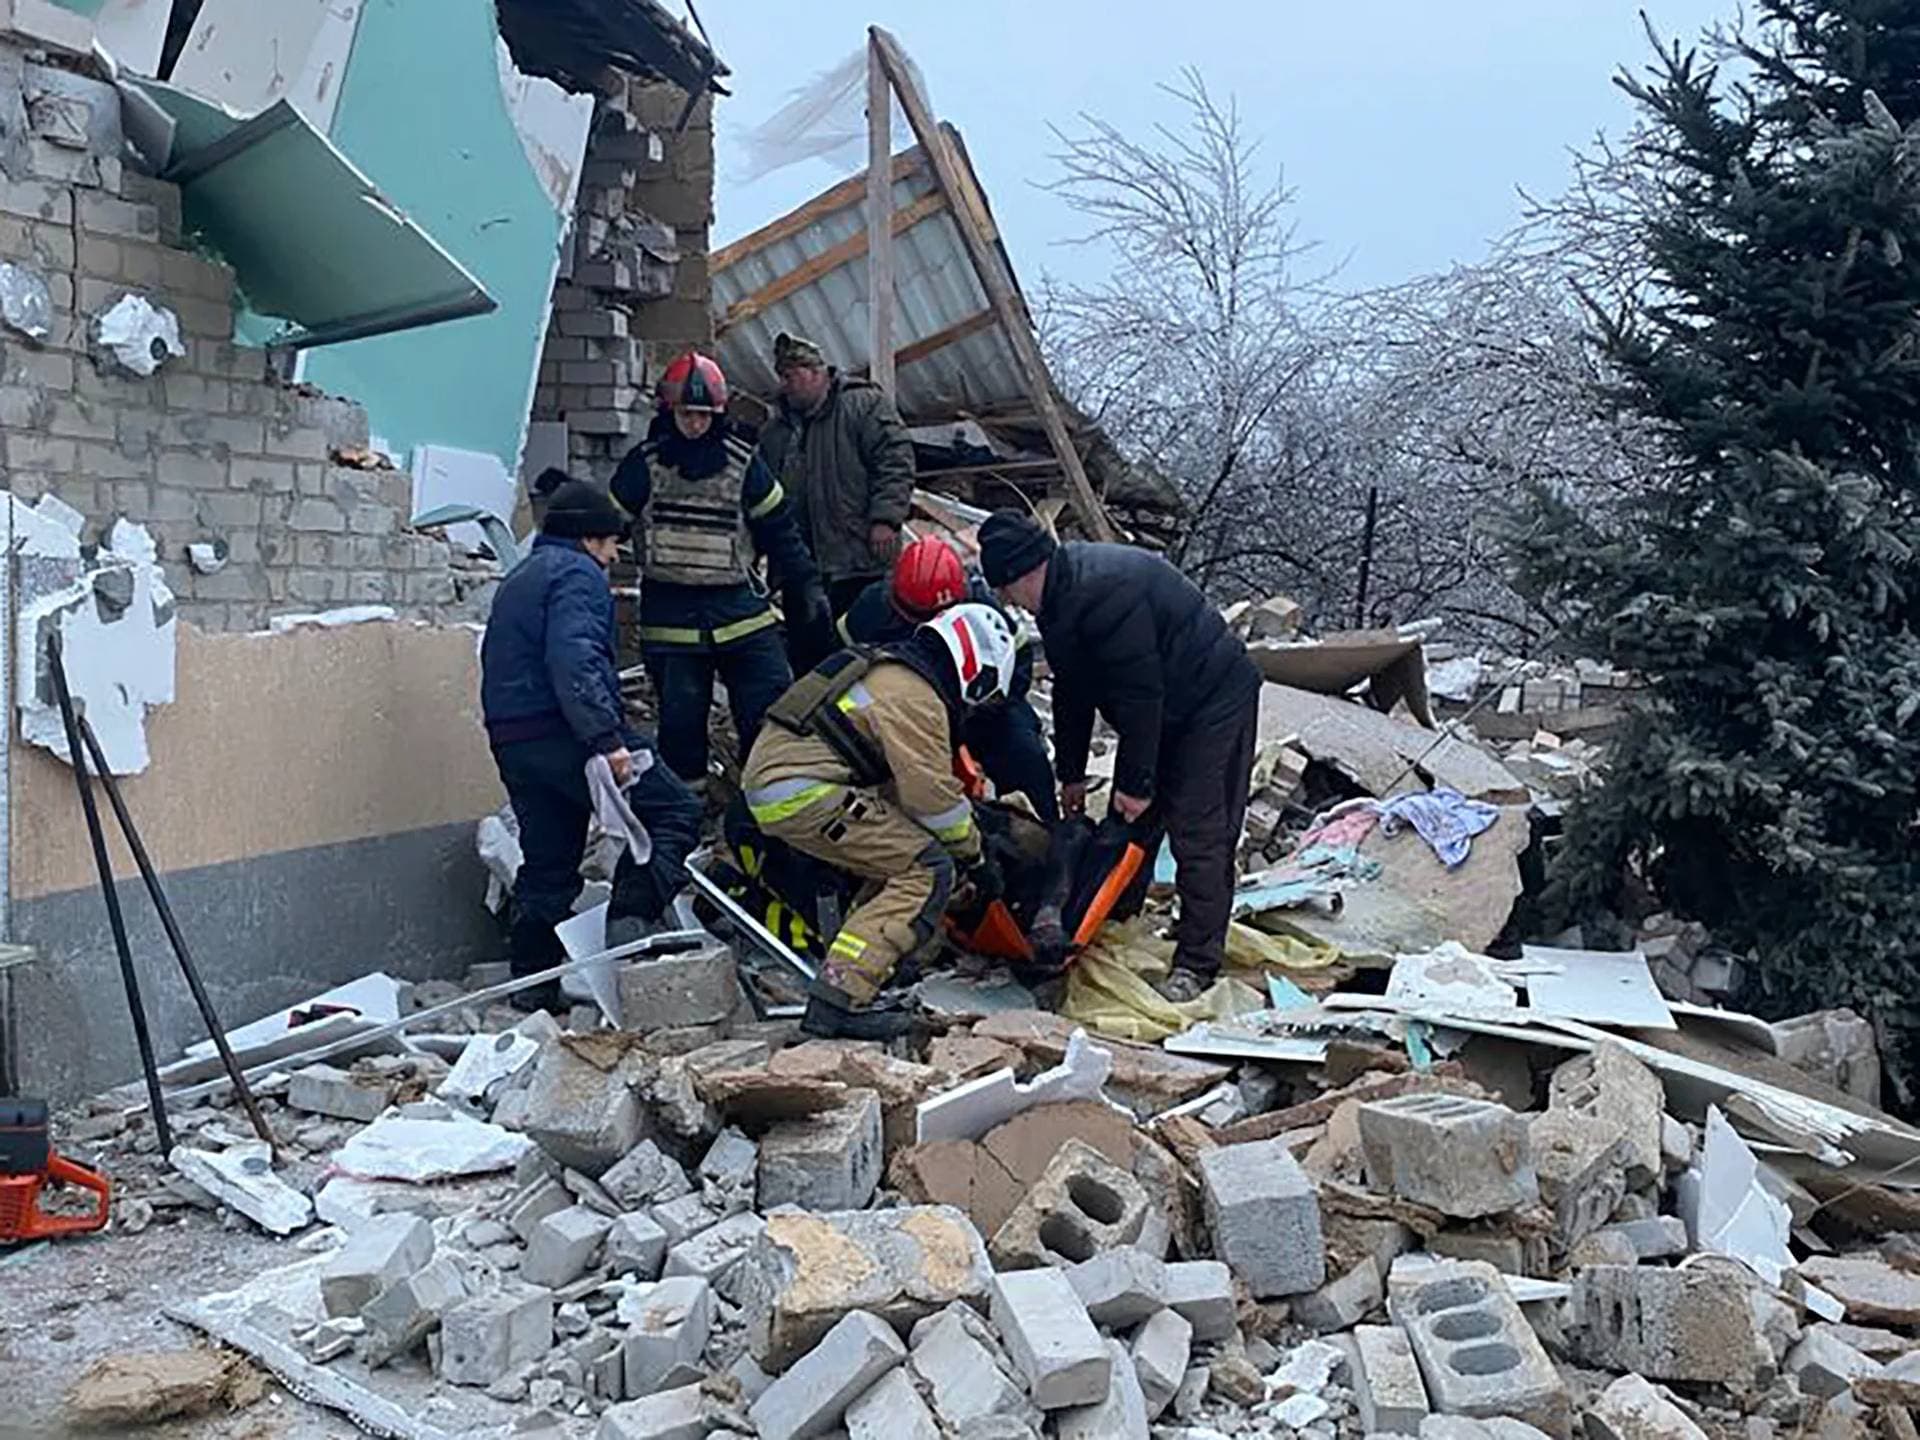 Rescuers help a wounded person after homes were destroyed by a Russian missile attack in Novomoskovsk